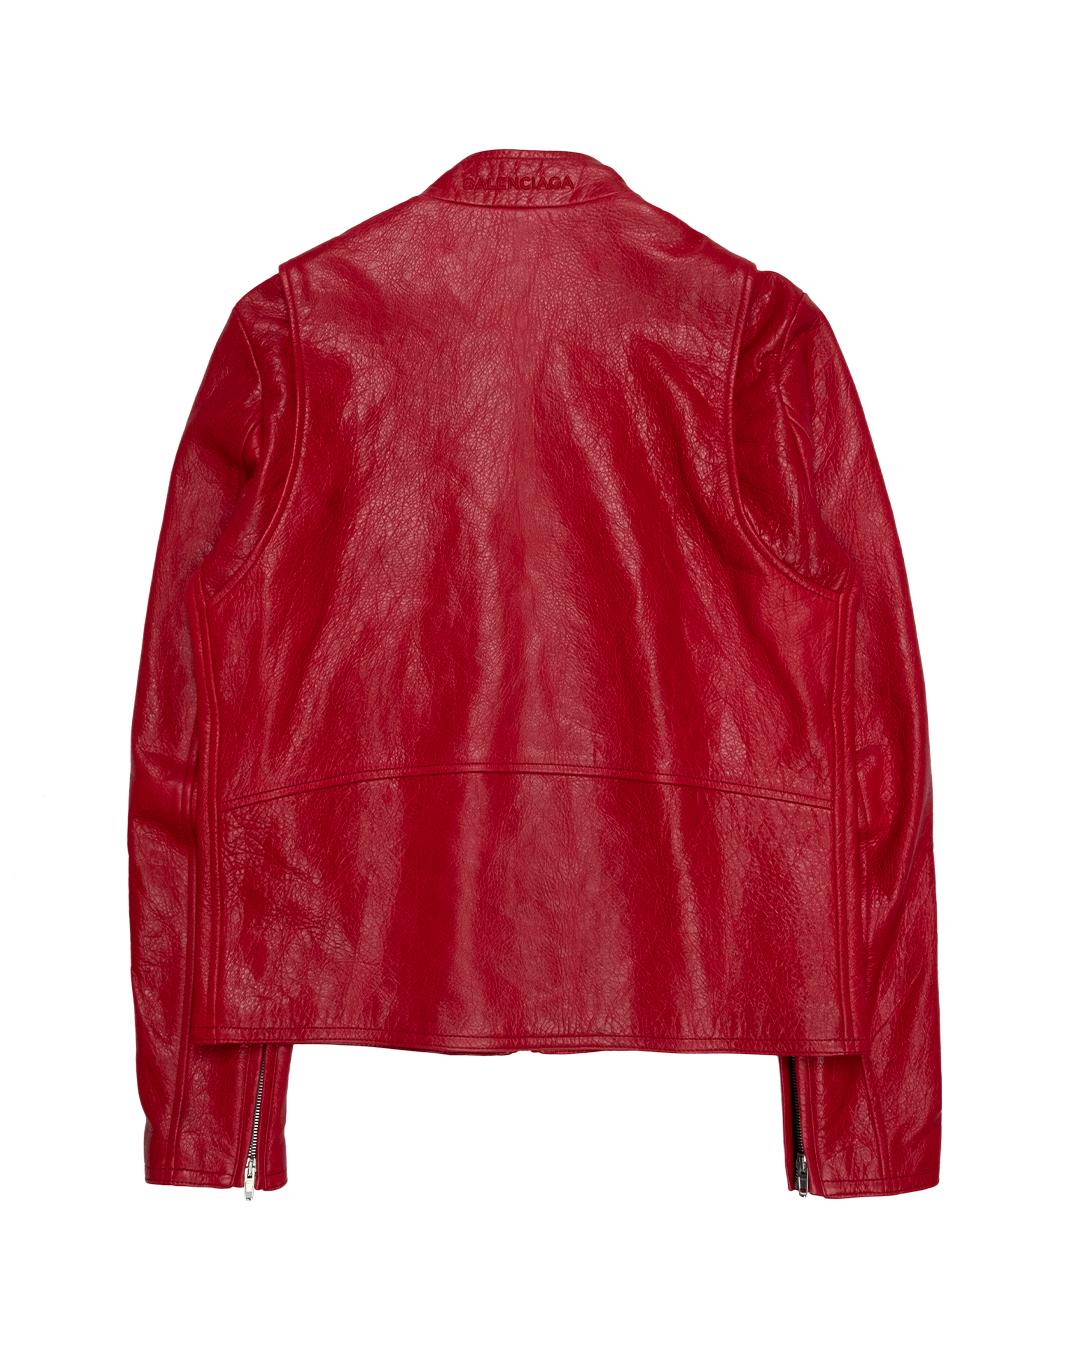 From Demna Gvasalia’s men’s debut at Balenciaga, despite its bold red color, the overall effect more subdued than usual for him. Though the Balenciaga logo appears on the back of the neck, it eschews any exaggerated silhouette or bold